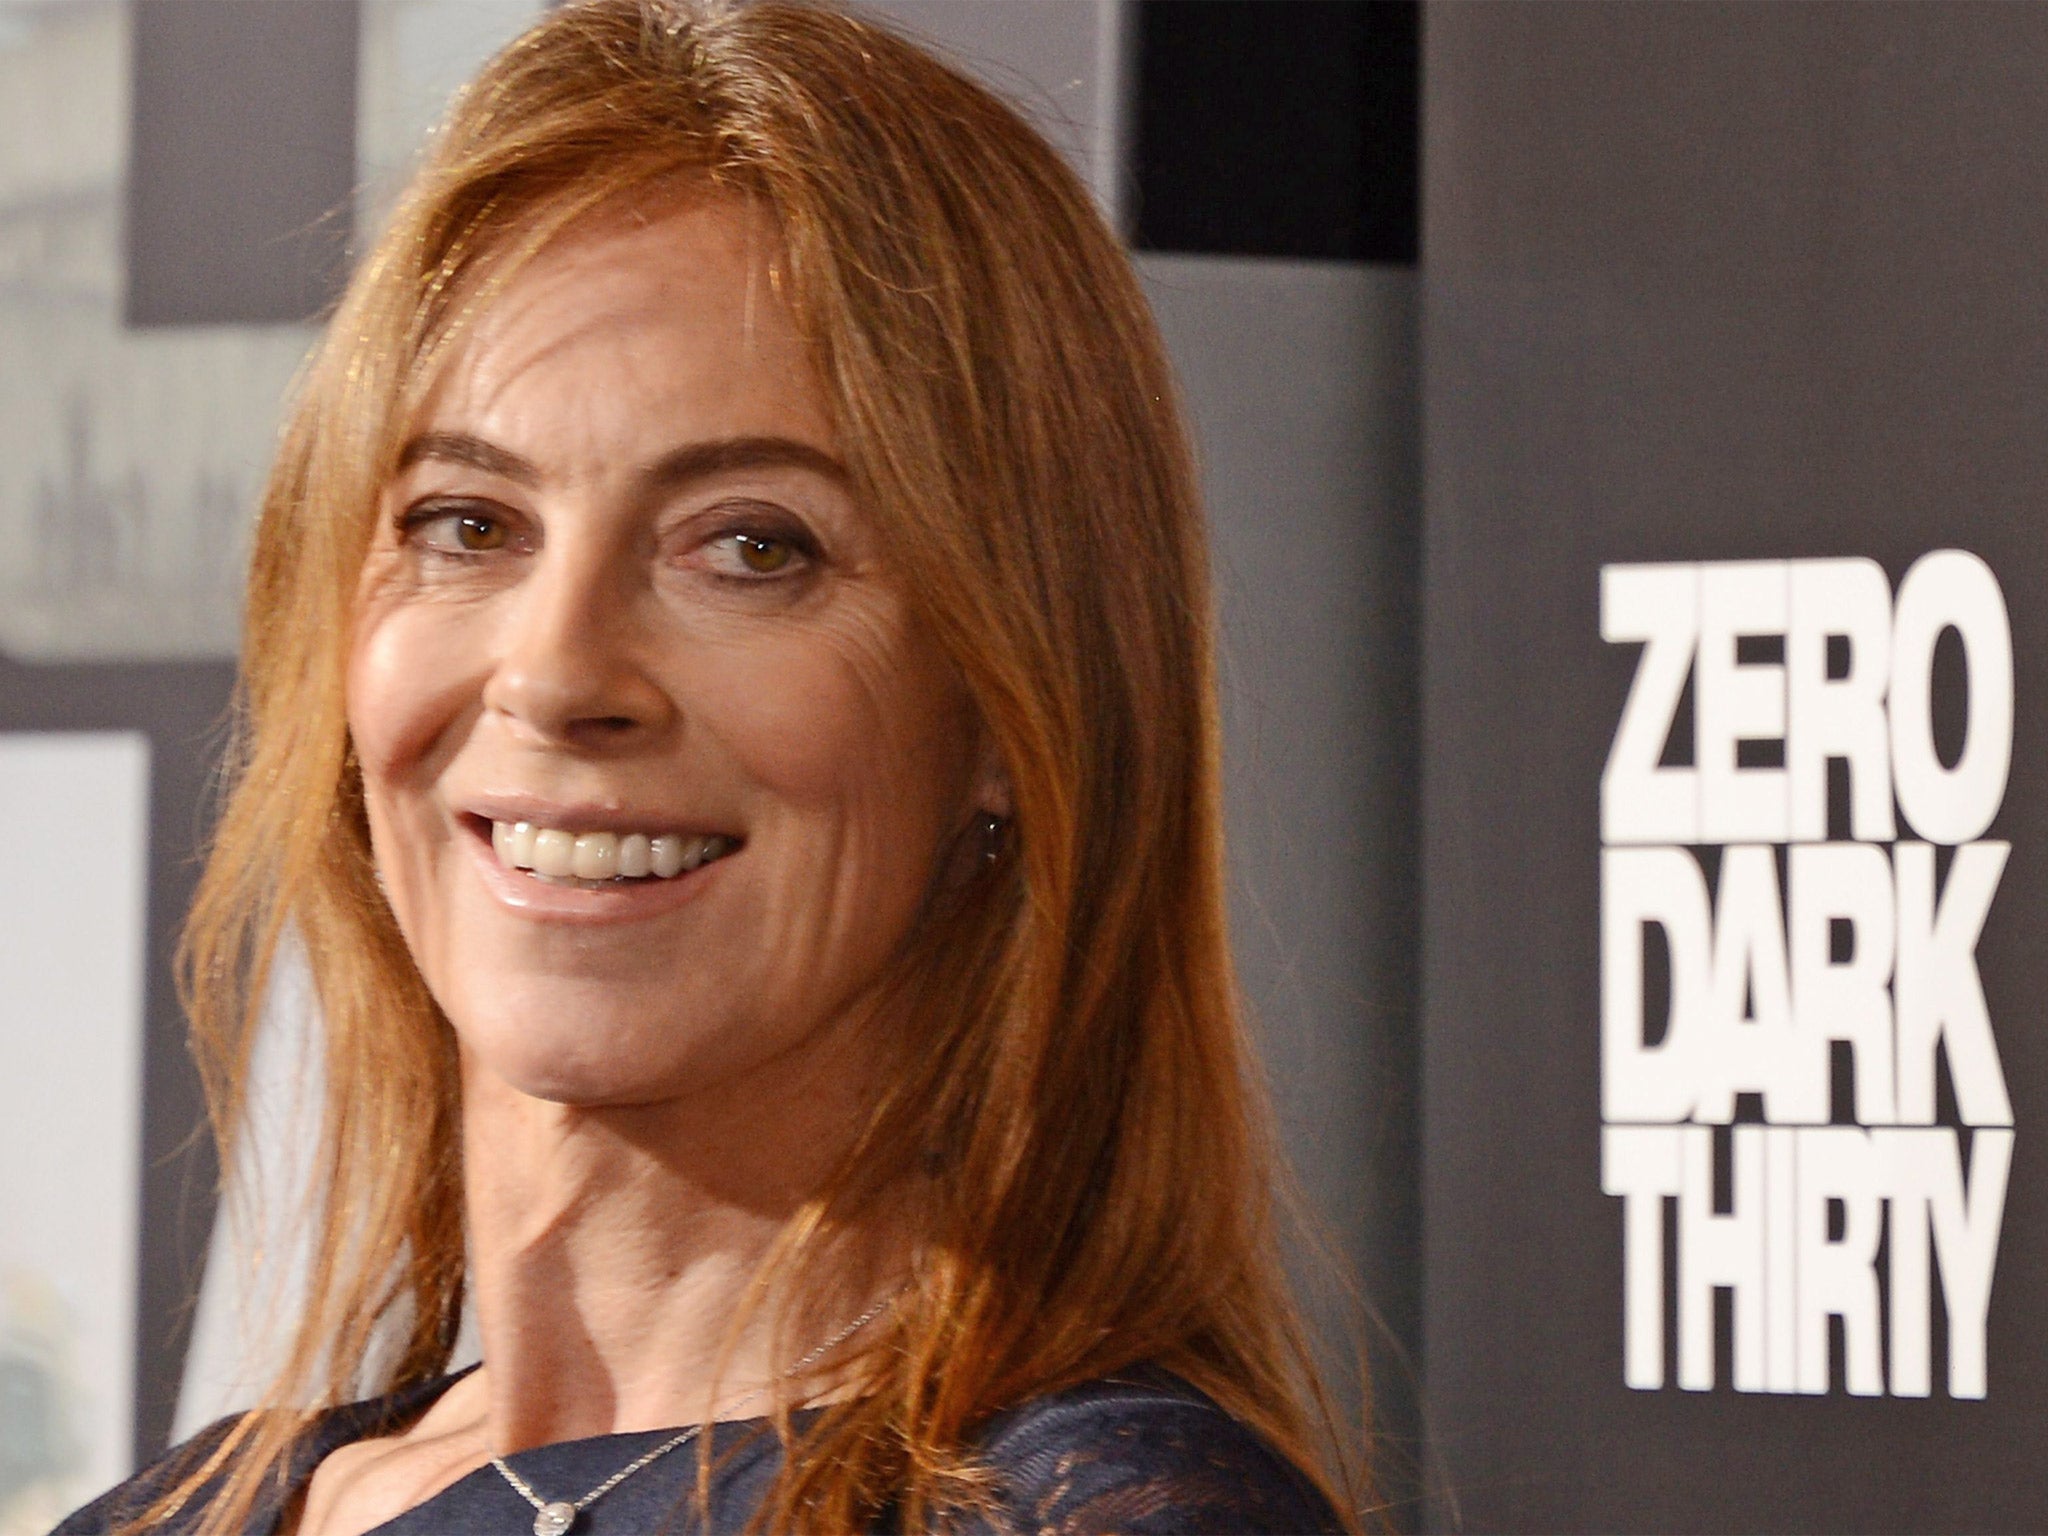 The Hurt Locker director Kathryn Bigelow could bring gravitas to the franchise